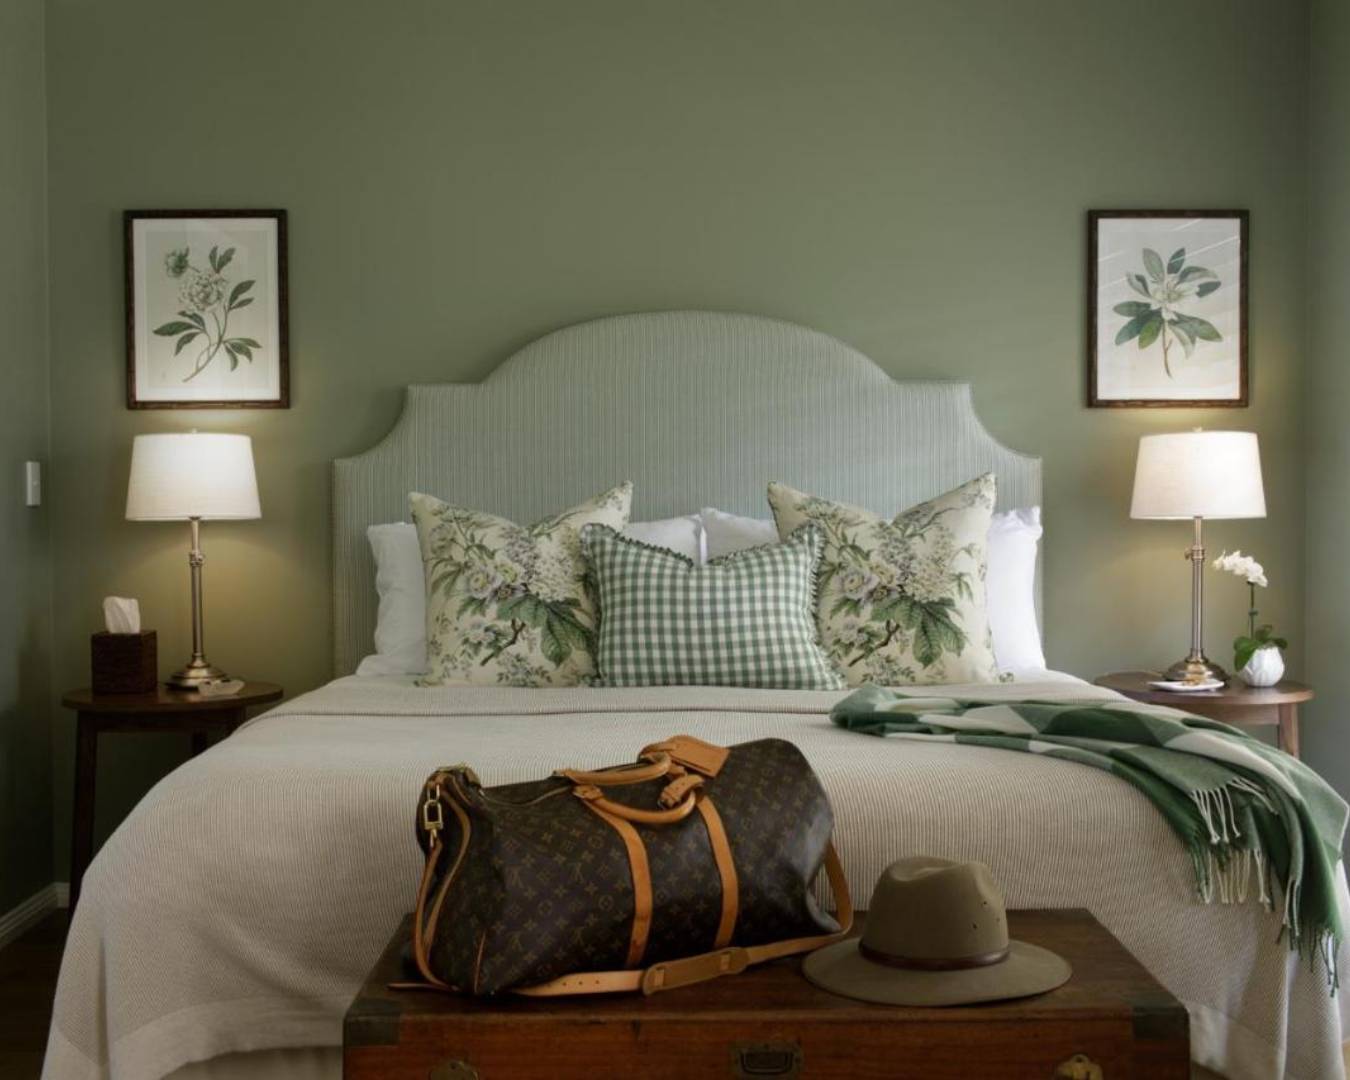 bedroom interior, green pillows on queen size bed